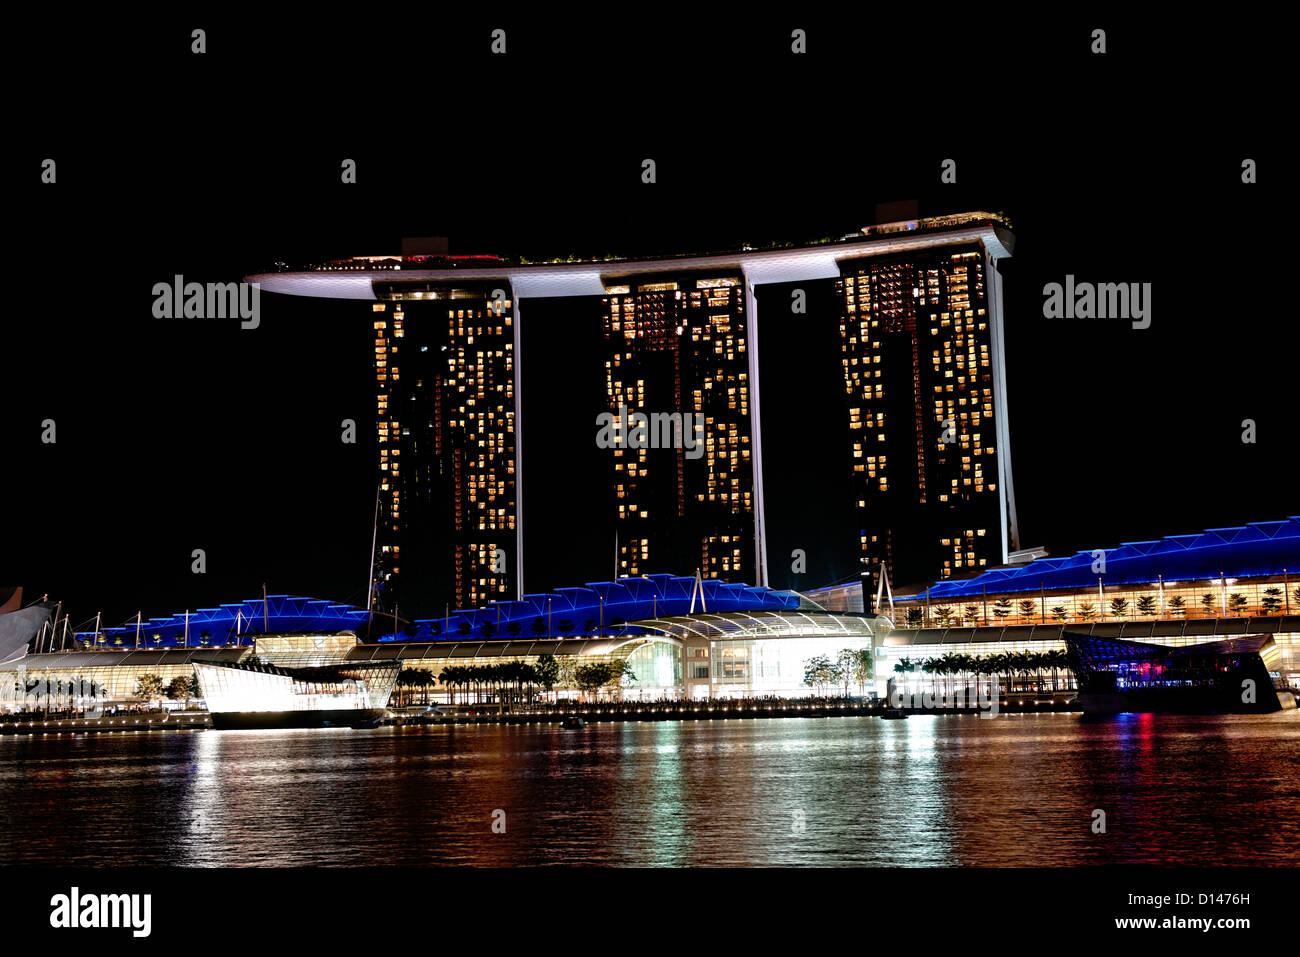 Marina Bay Sands hotel casino and shopping complex with Skypark on the roof, Marina Bay, Singapore at night. Stock Photo